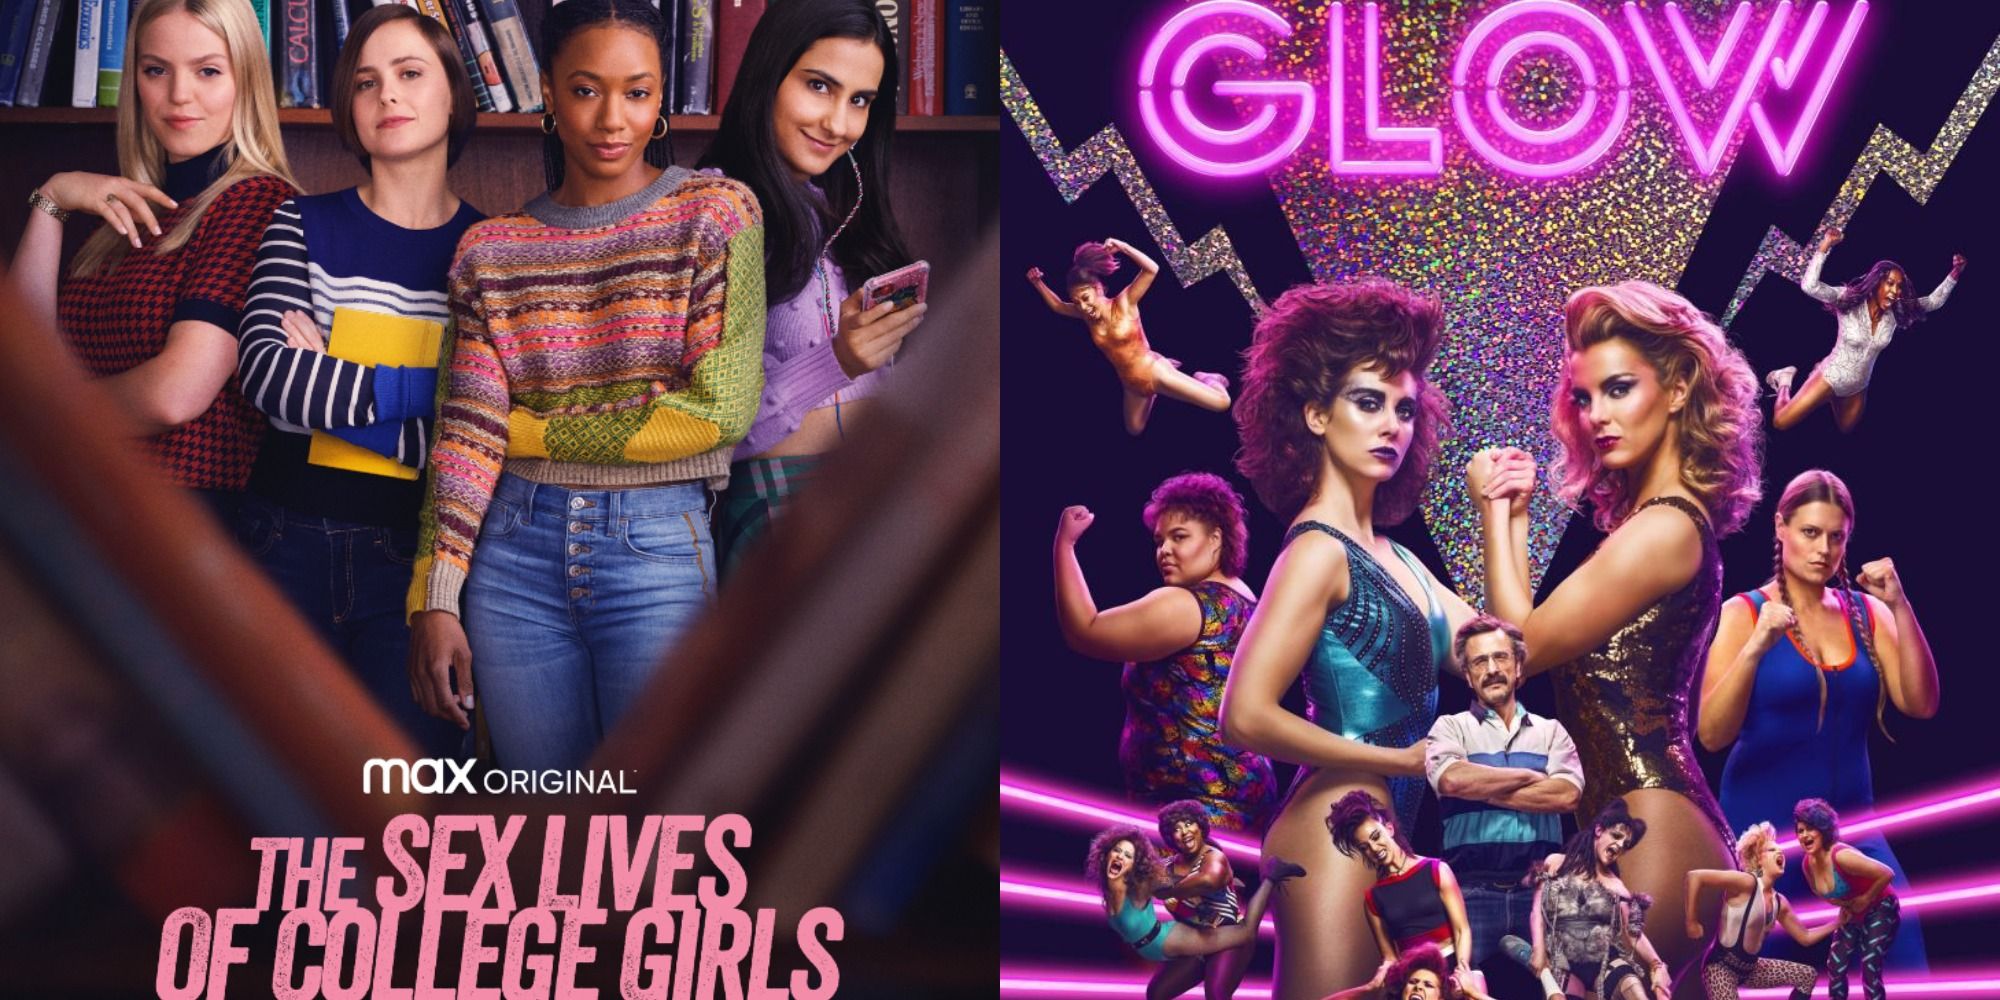 Split image showing posters for The Sex Lives of College Girls and Glow